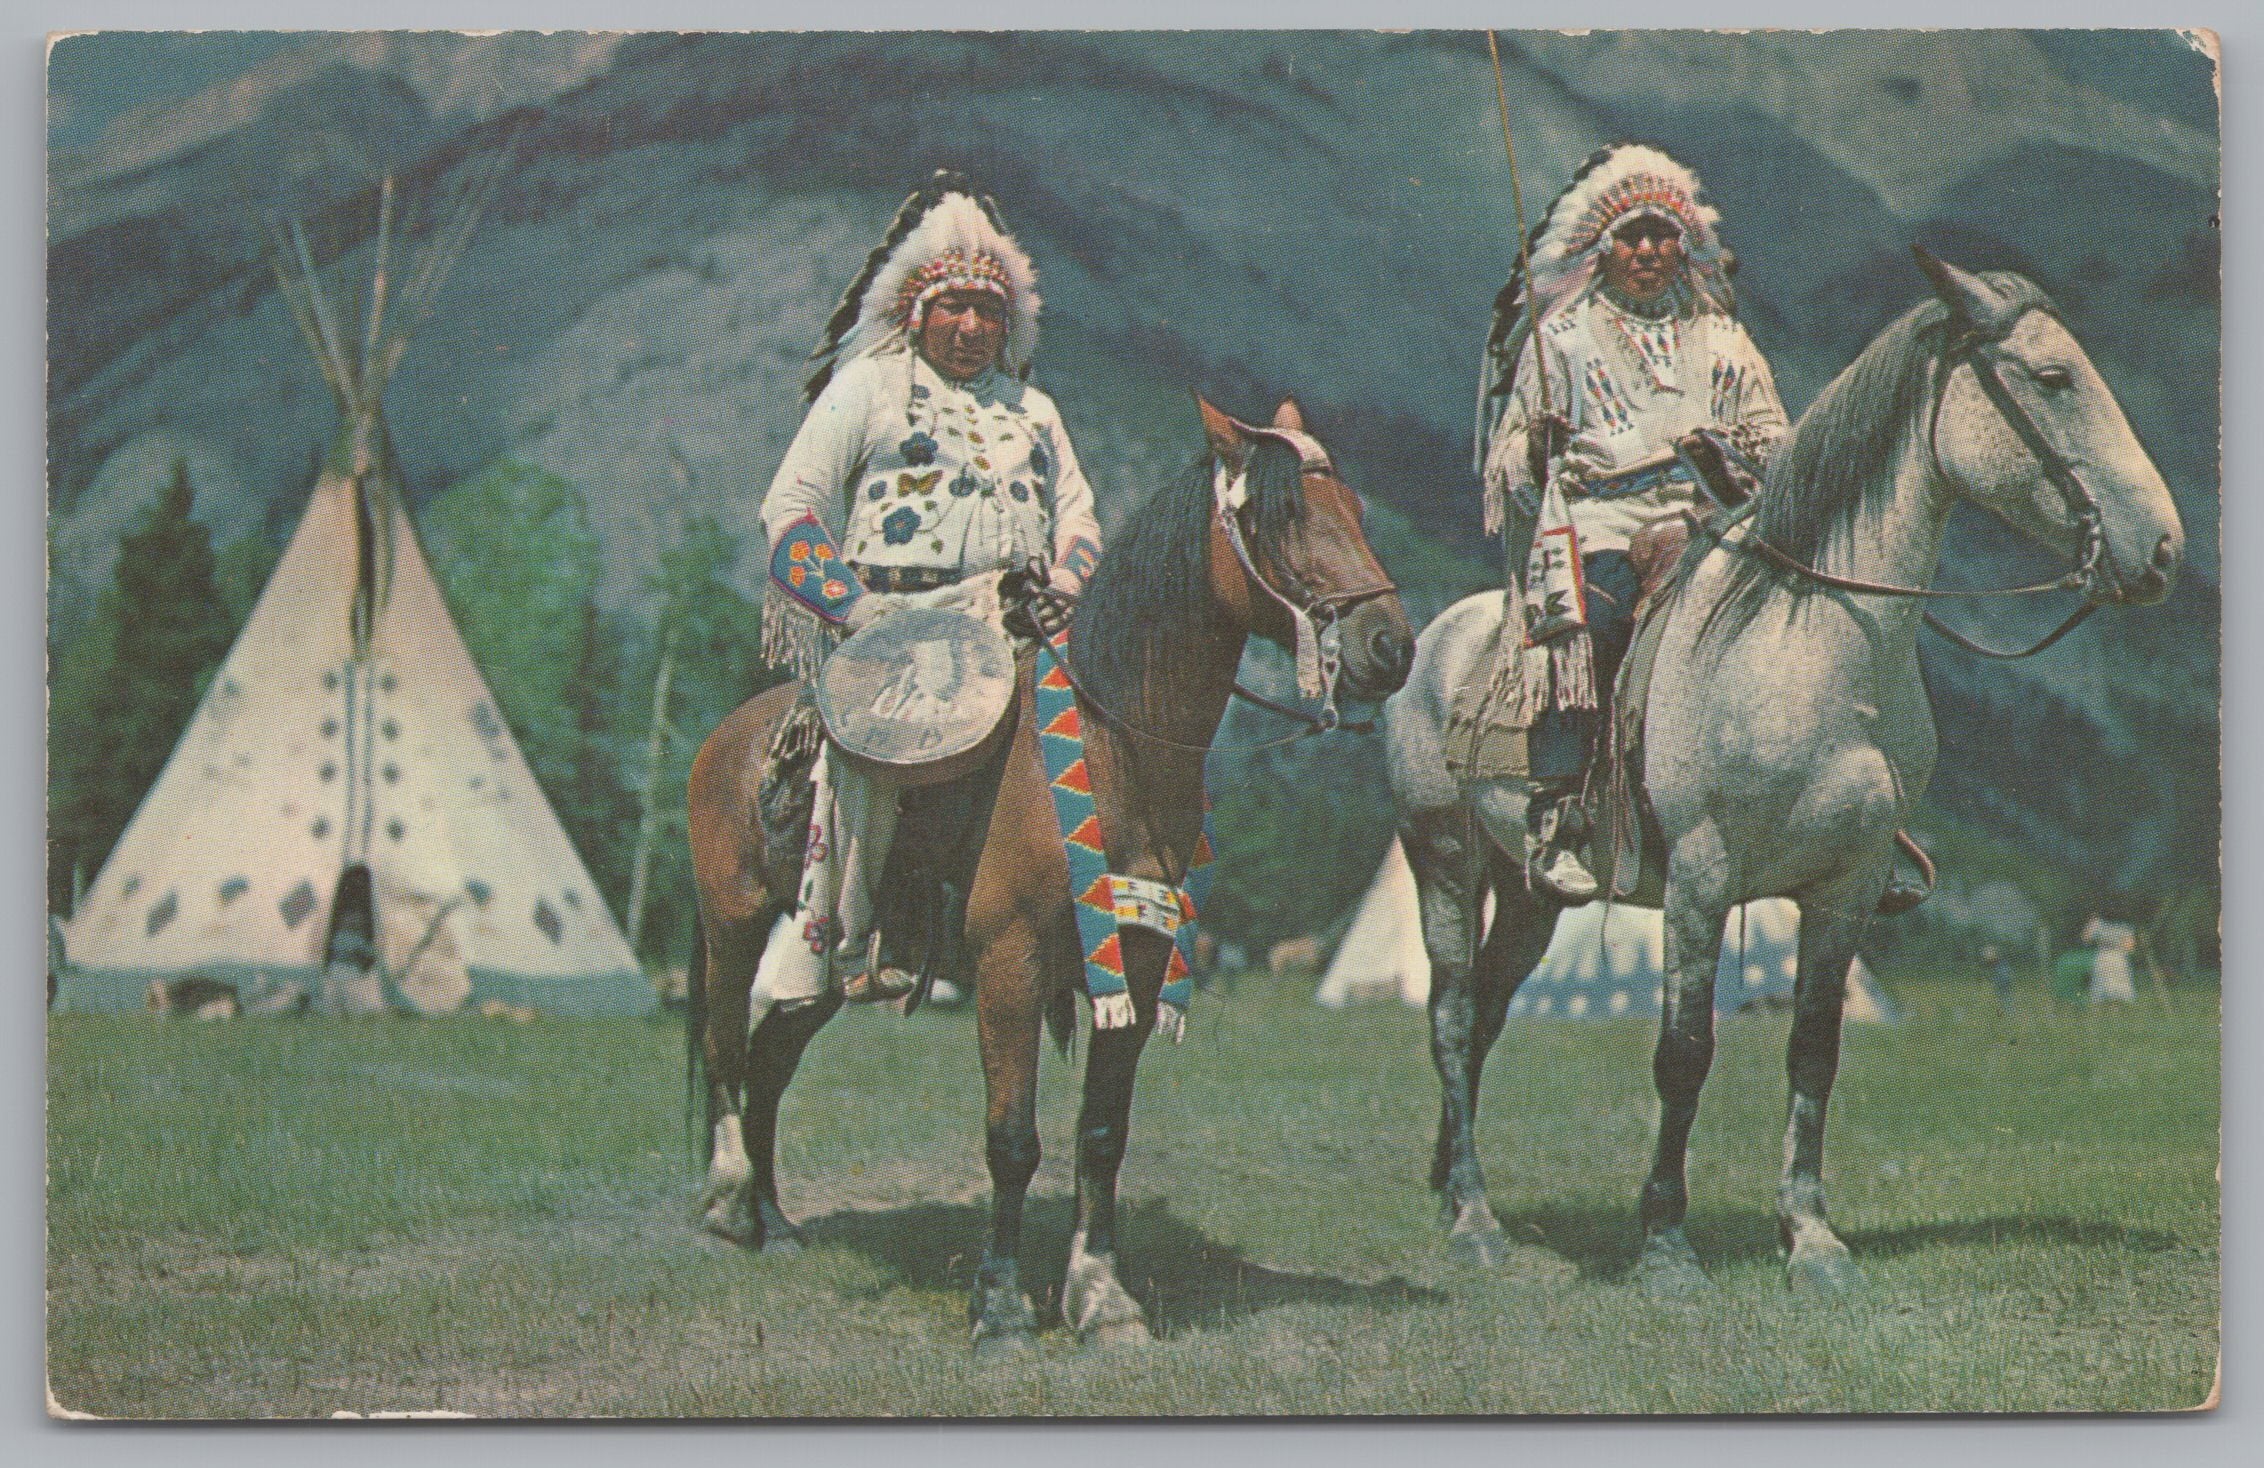 Indians Chiefs In A Native Setting, Vintage Post Card.